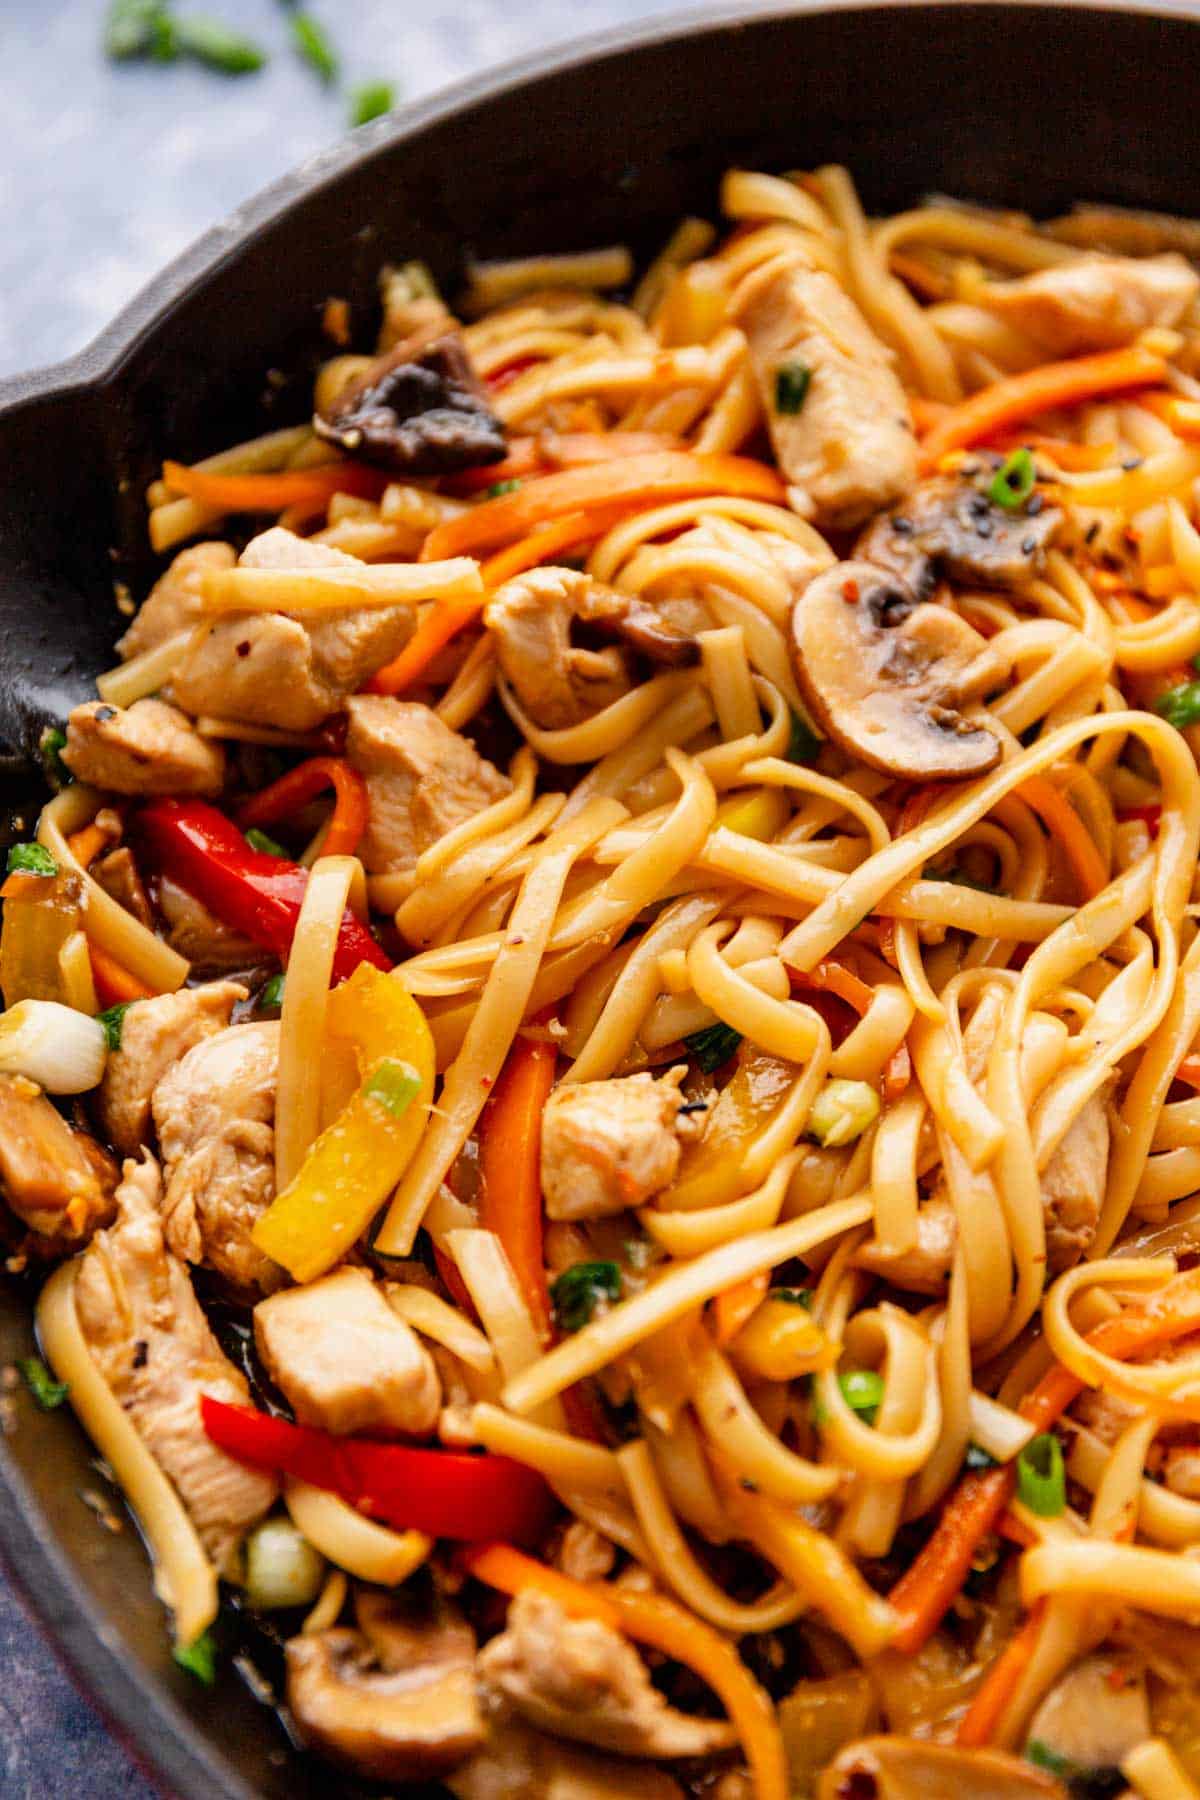 lo mein style noodles with veggies and chicken in skillet.